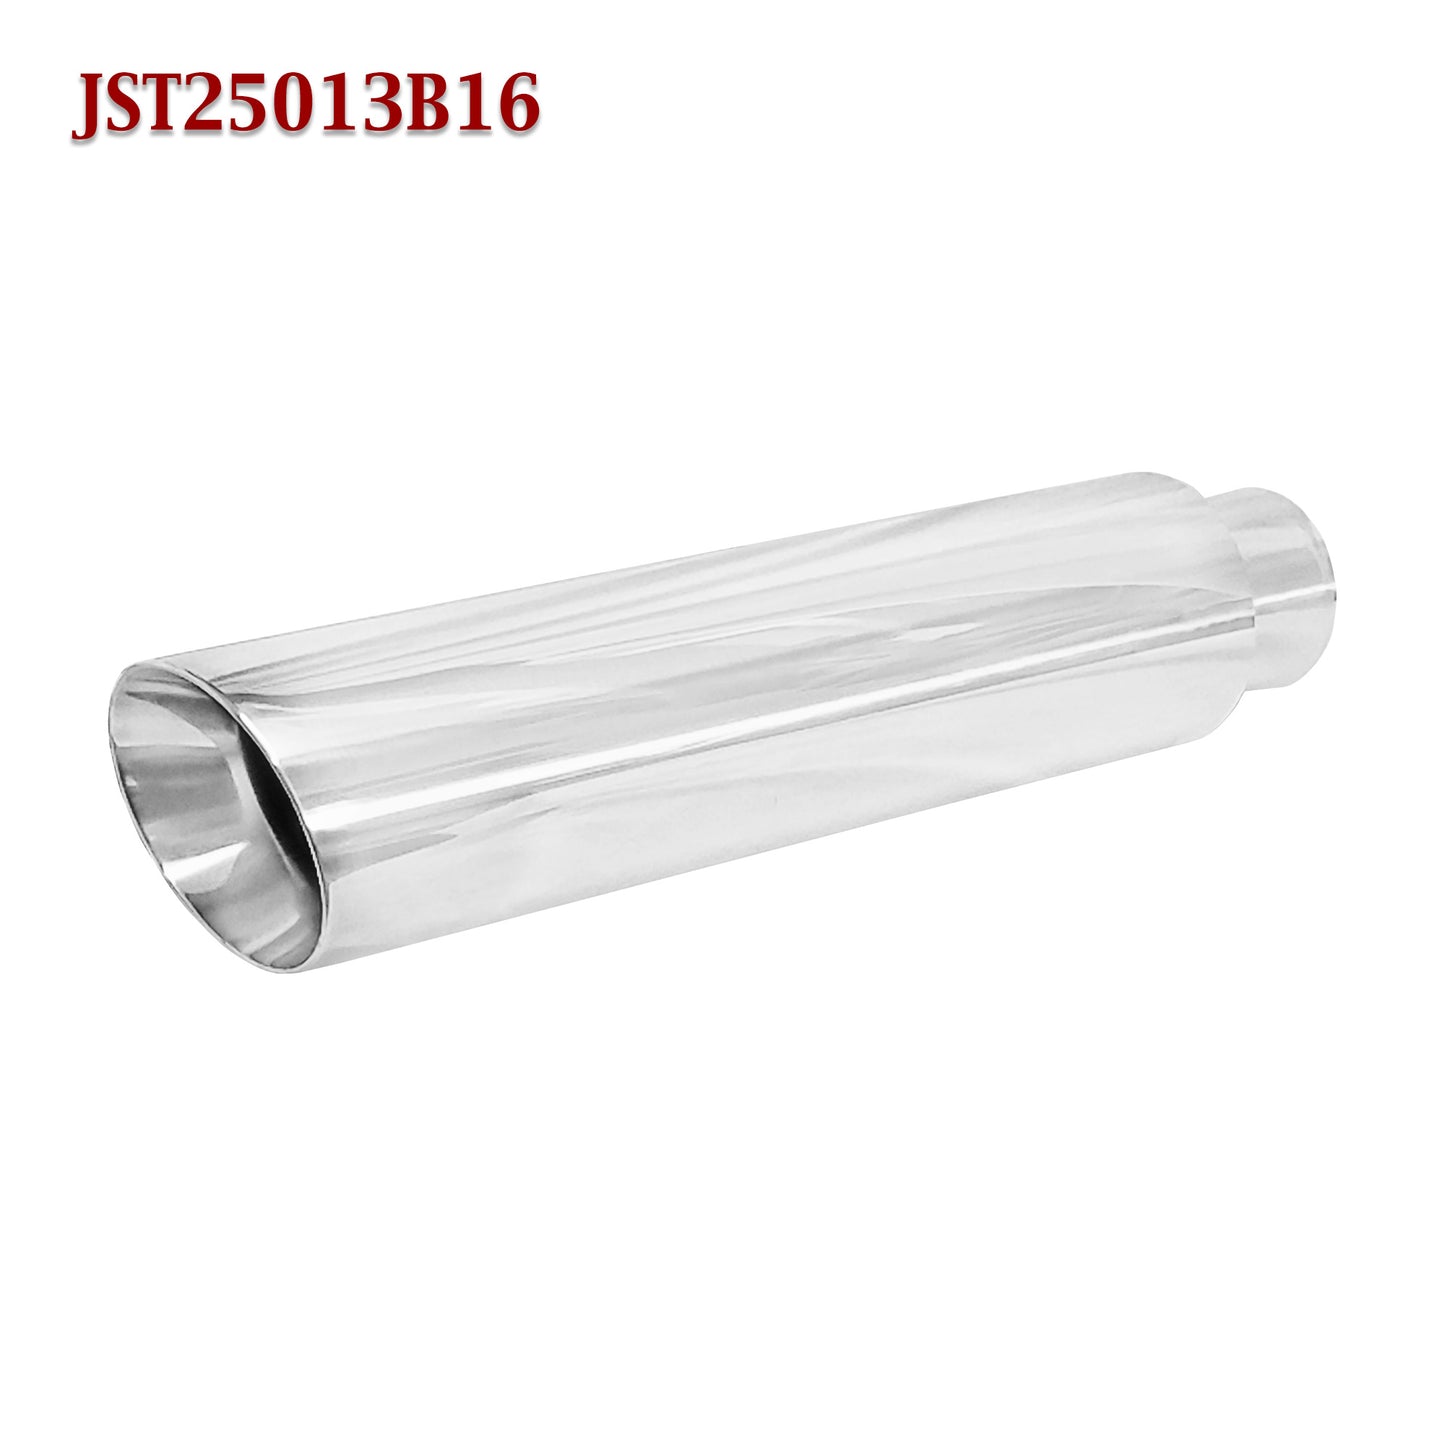 JST25013B16 2.5" Stainless Round Truck Exhaust Tip 2 1/2" In 3 1/2" Out 16" Long